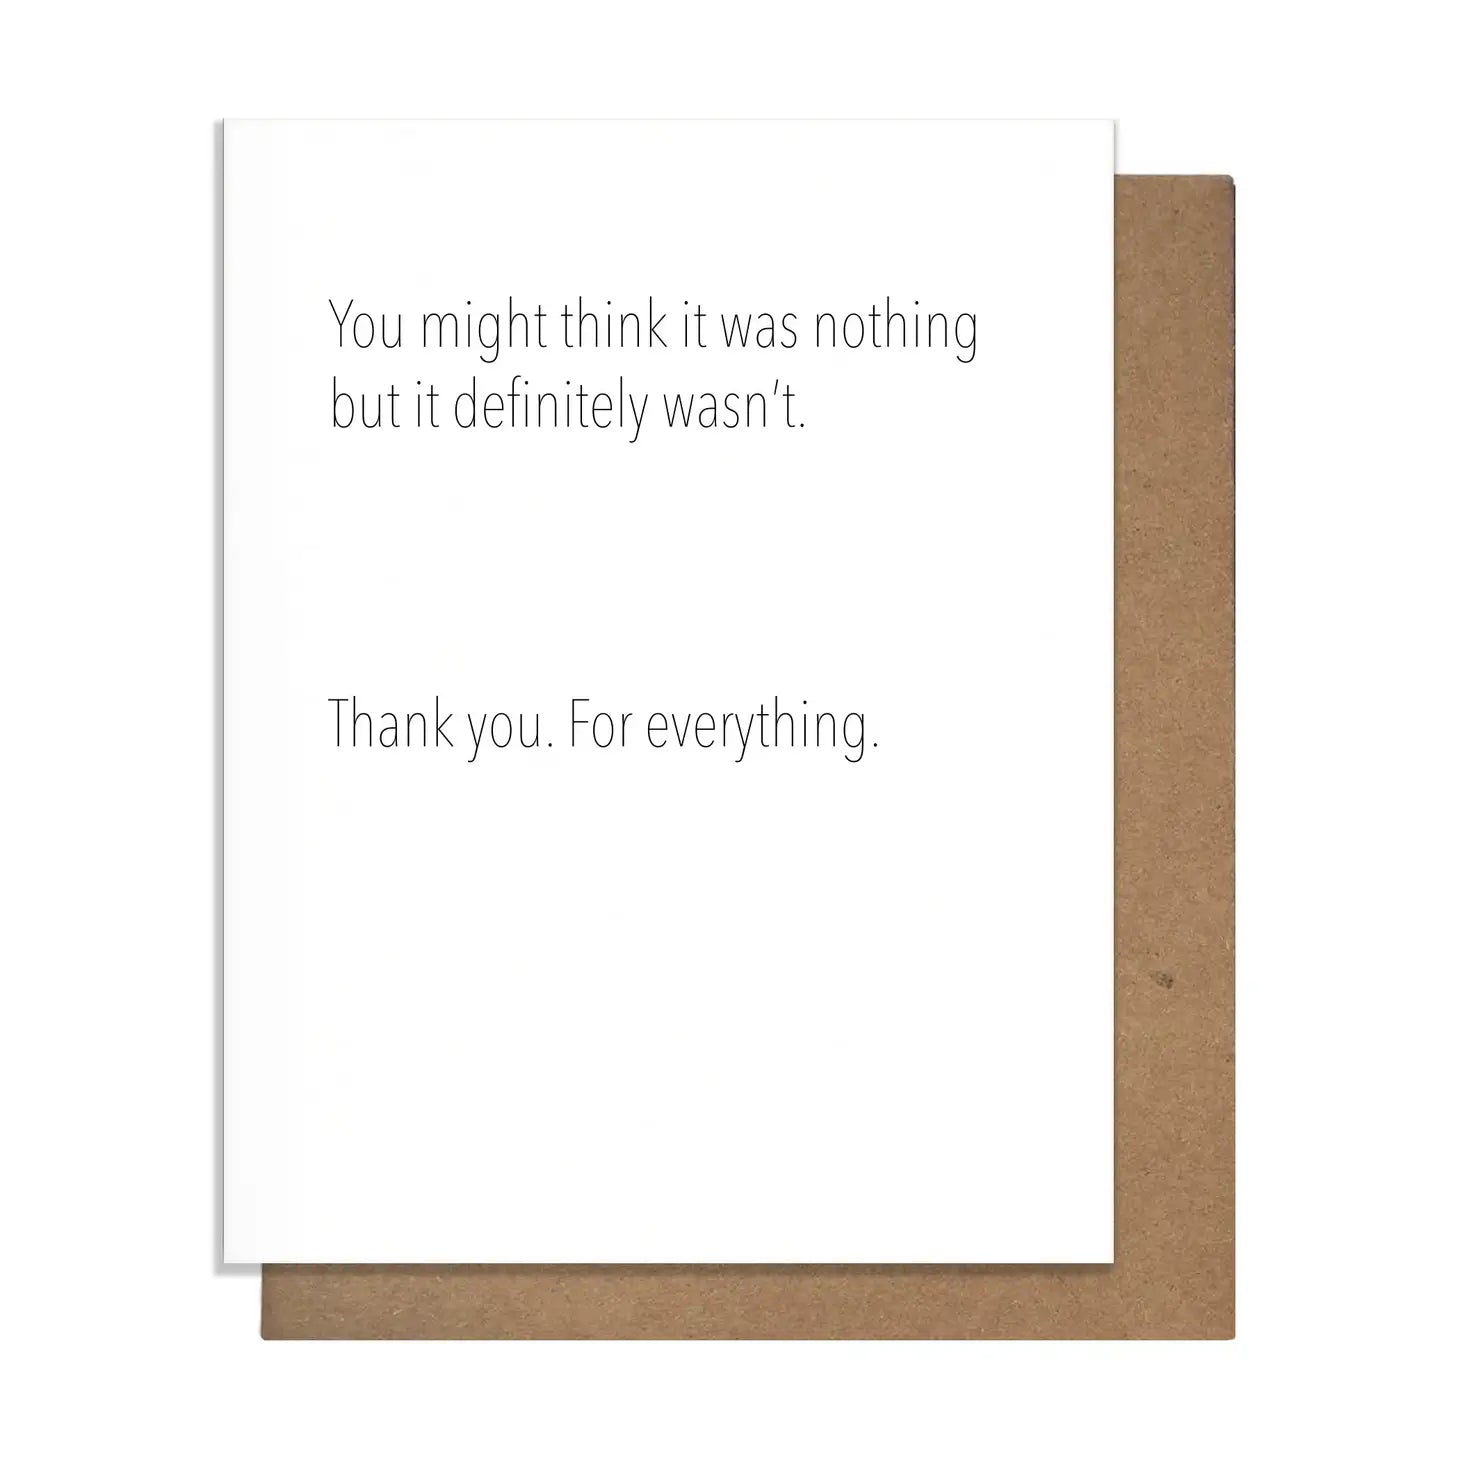 Thank you for everything - Greeting Card